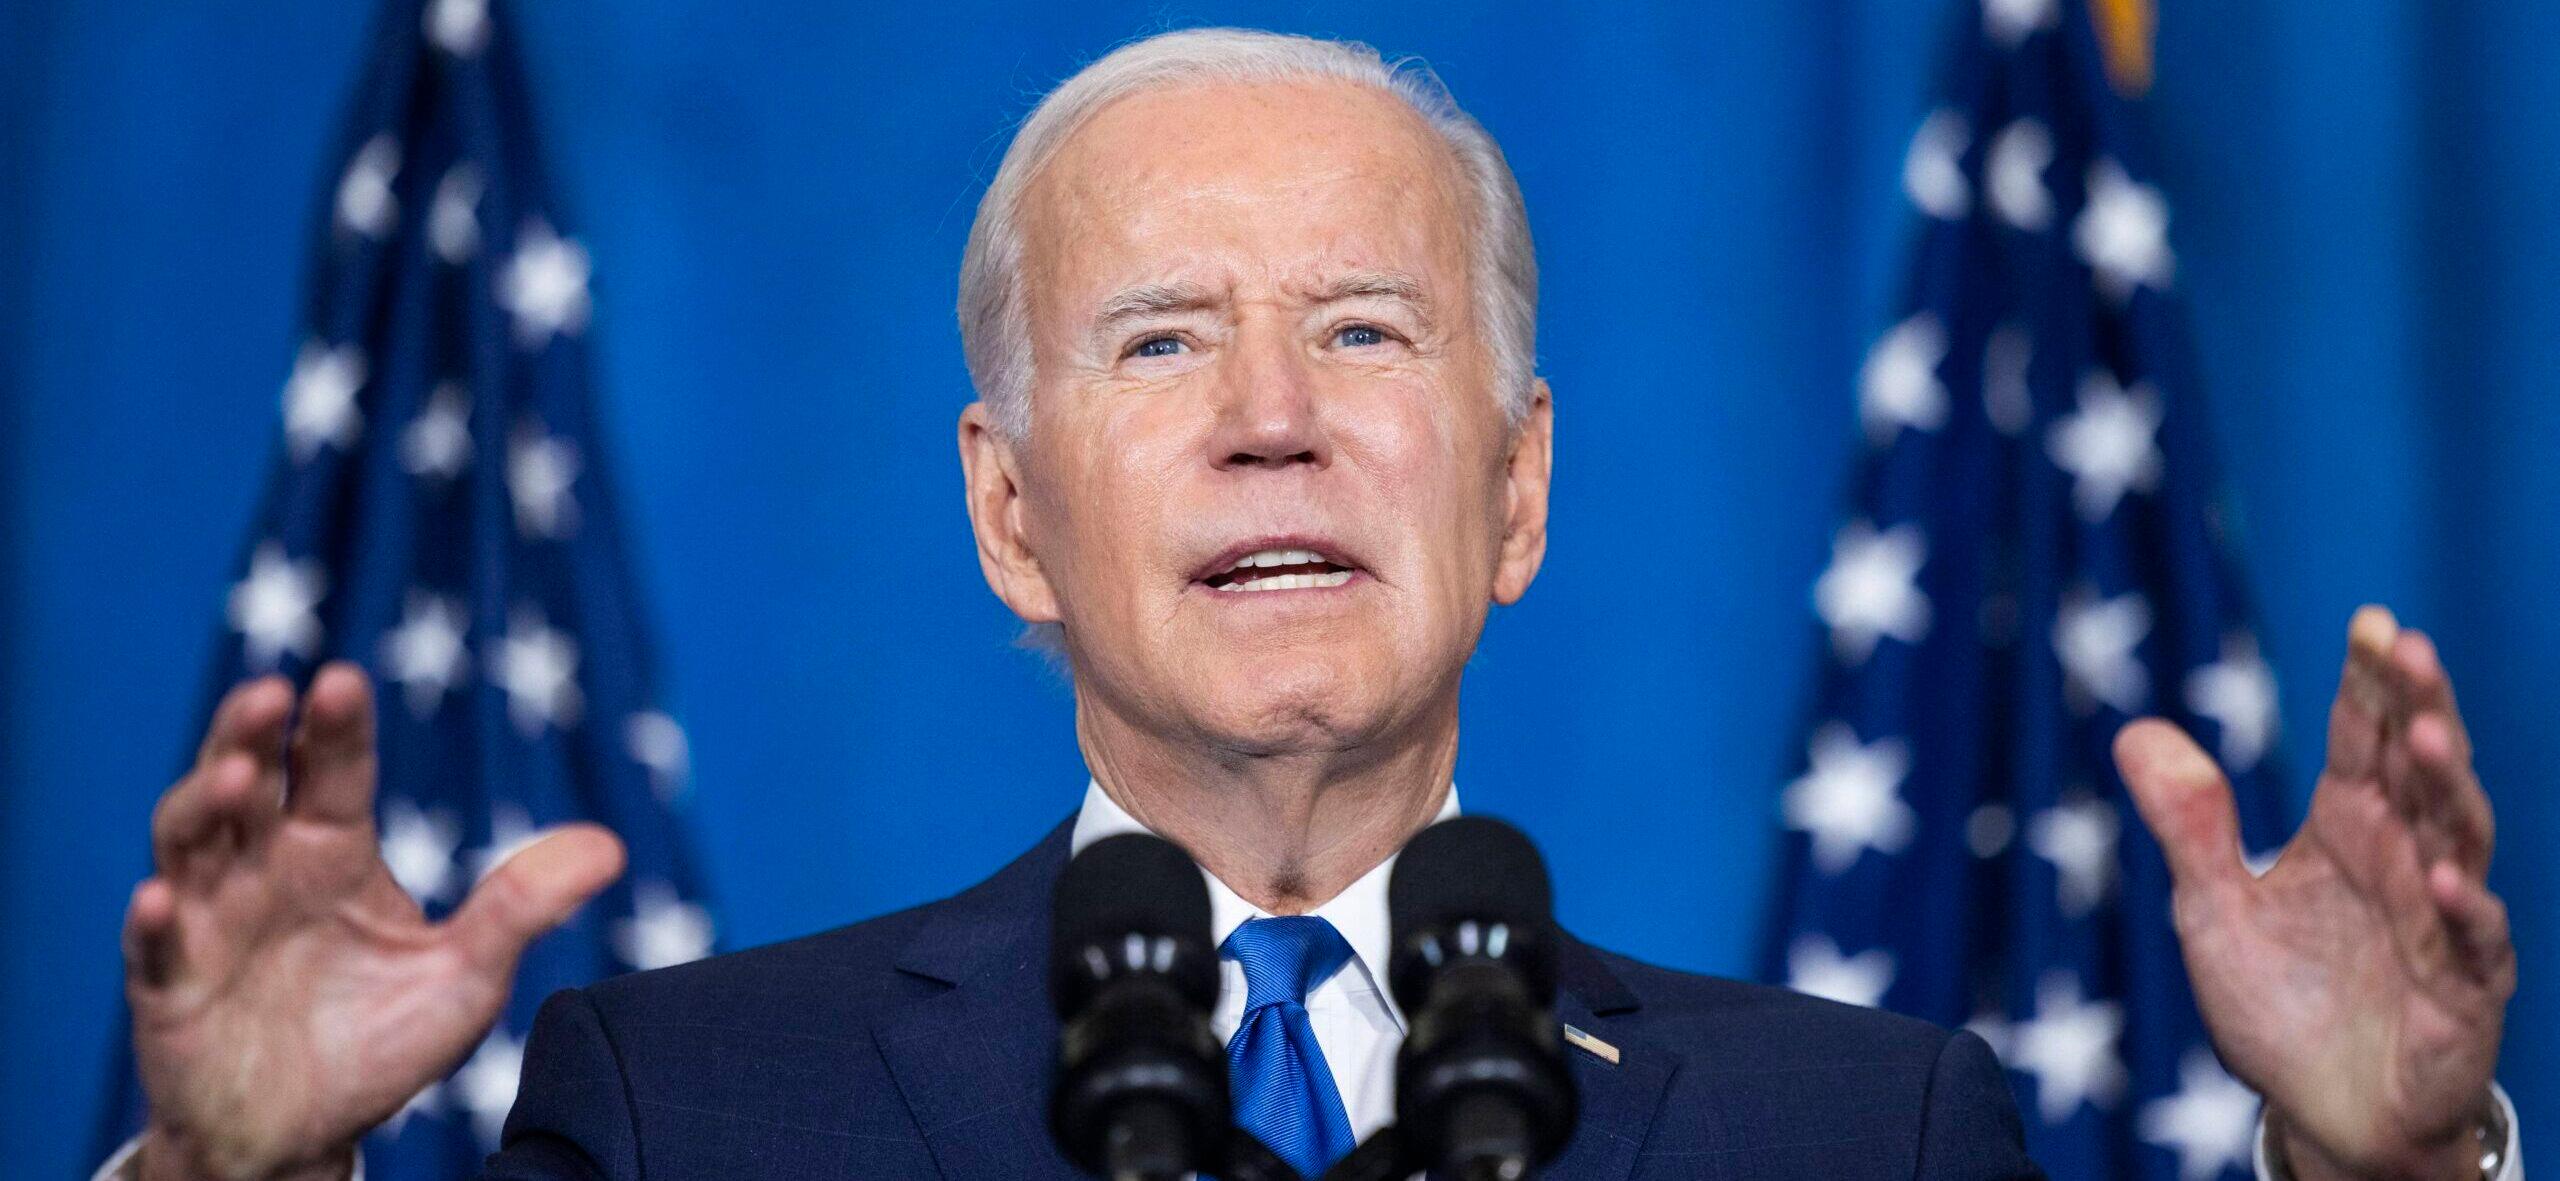 President Joe Biden Seen In Public For First Time Since Testing Positive For COVID-19